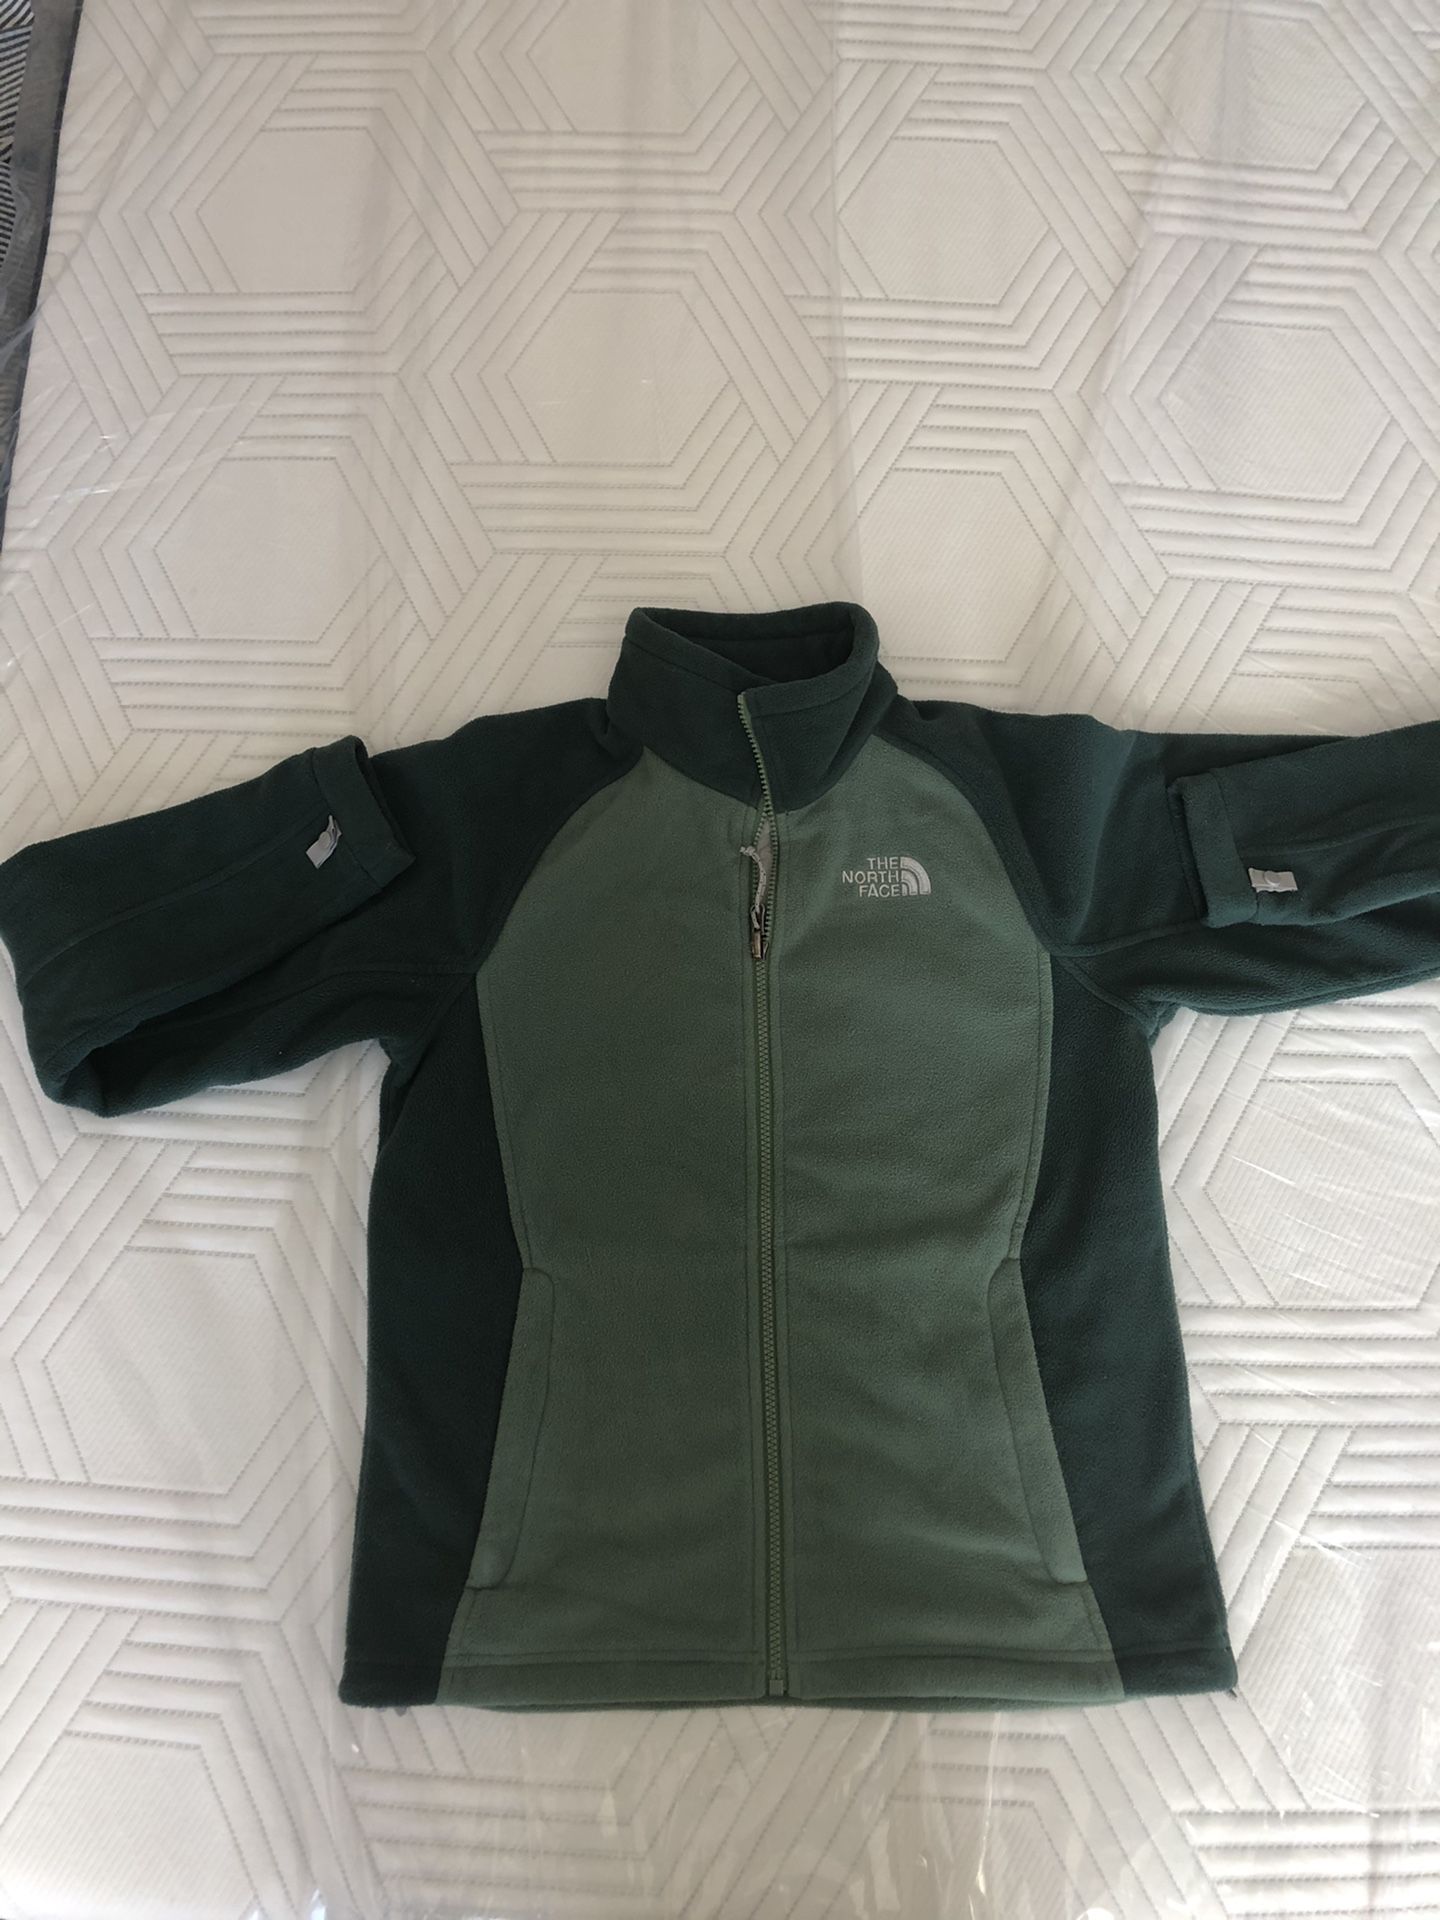 North face jacket for sell